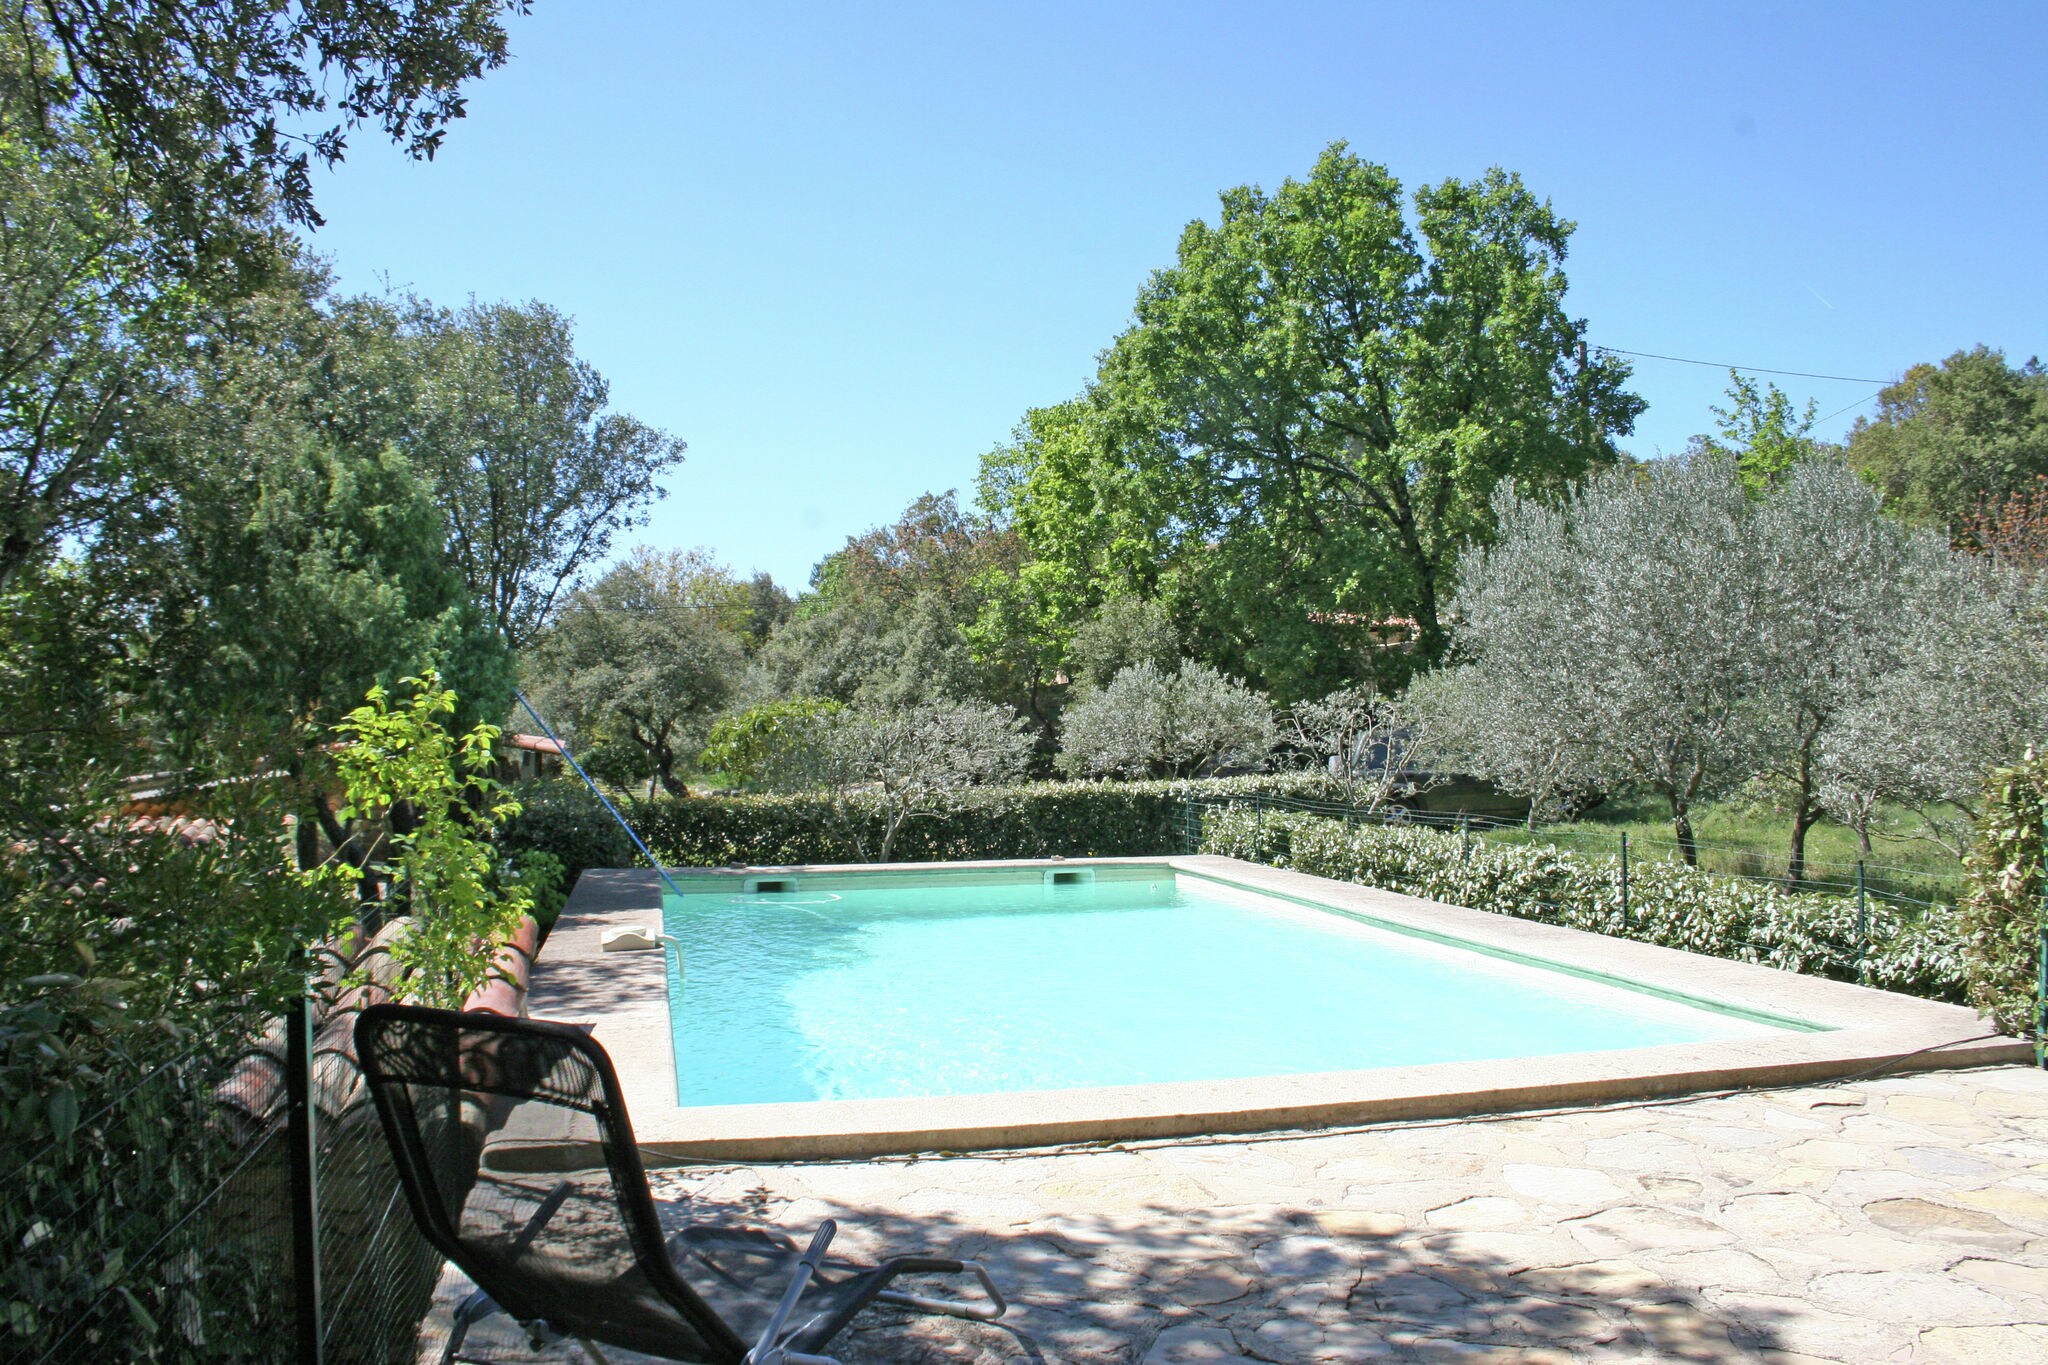 A characteristic detached house with swimming pool, situated in a green and peaceful area